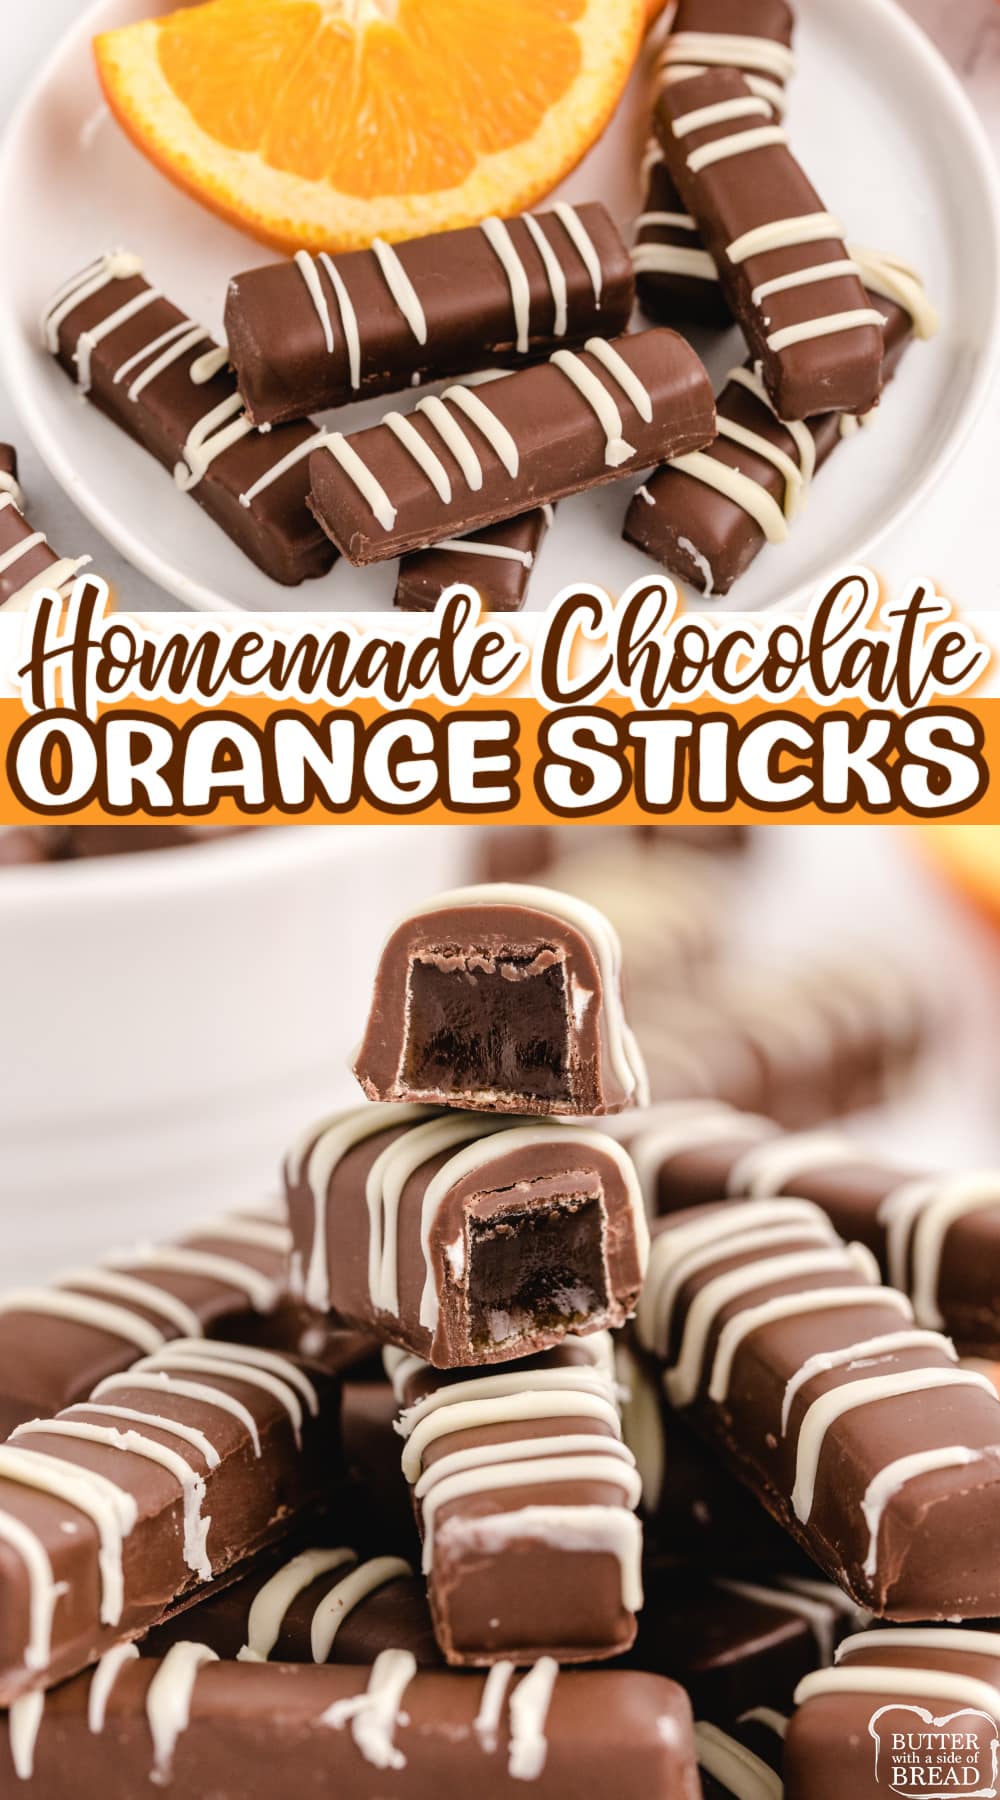 Homemade Chocolate Orange Sticks are made with a delicious orange jelly filling dipped in melted chocolate. Simple chocolate candy recipe that is so easy to make!